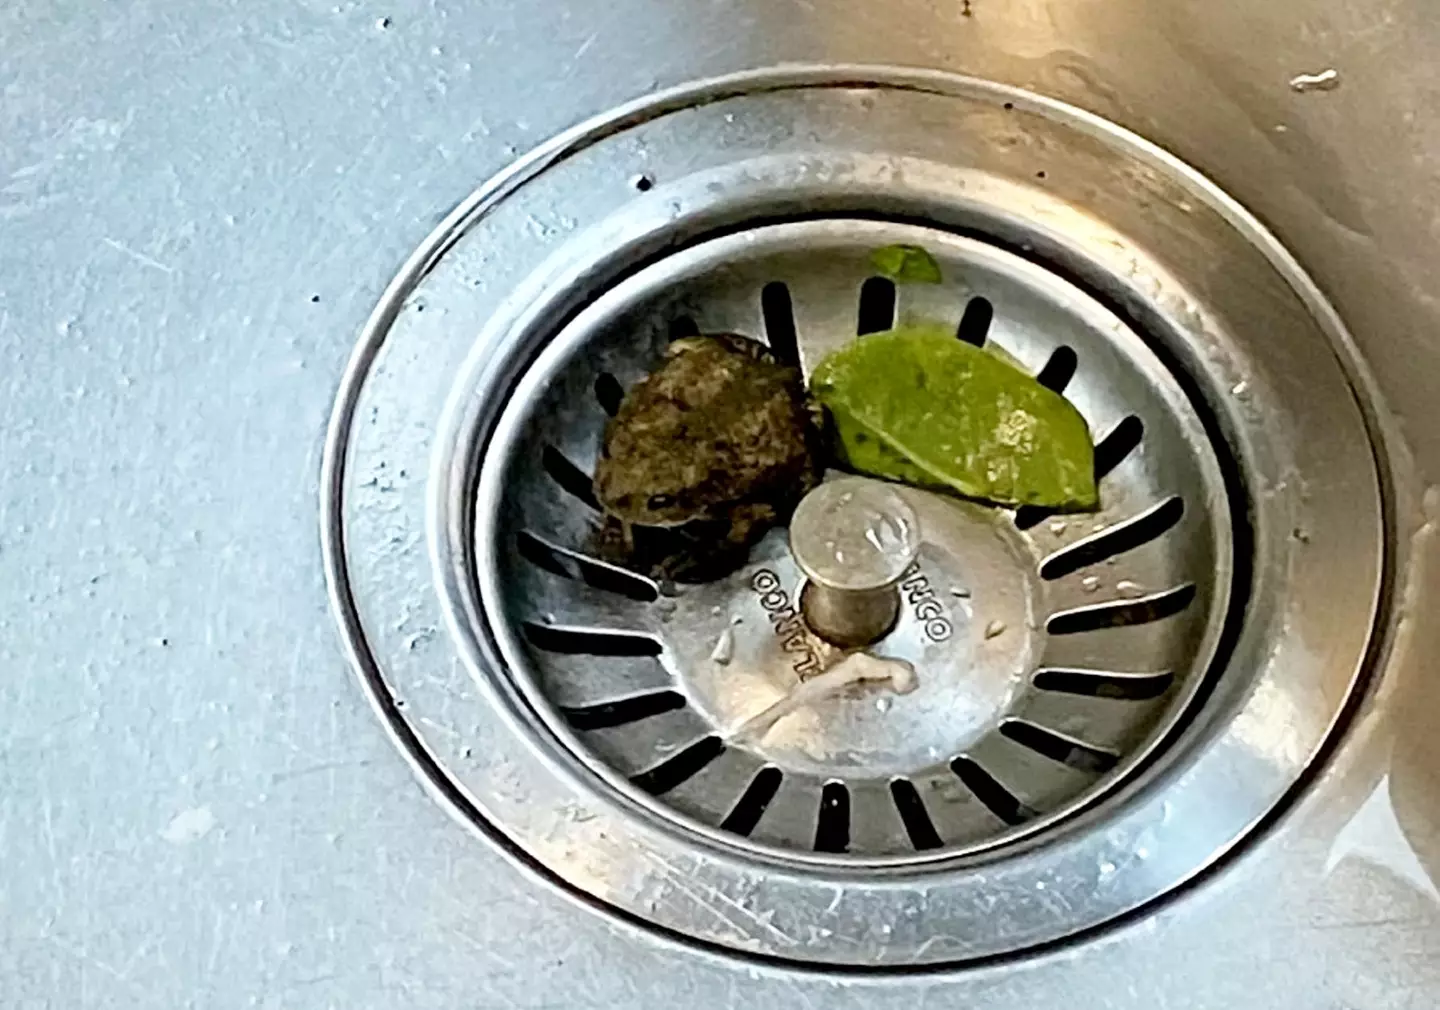 The family released the frog outside after finding it (